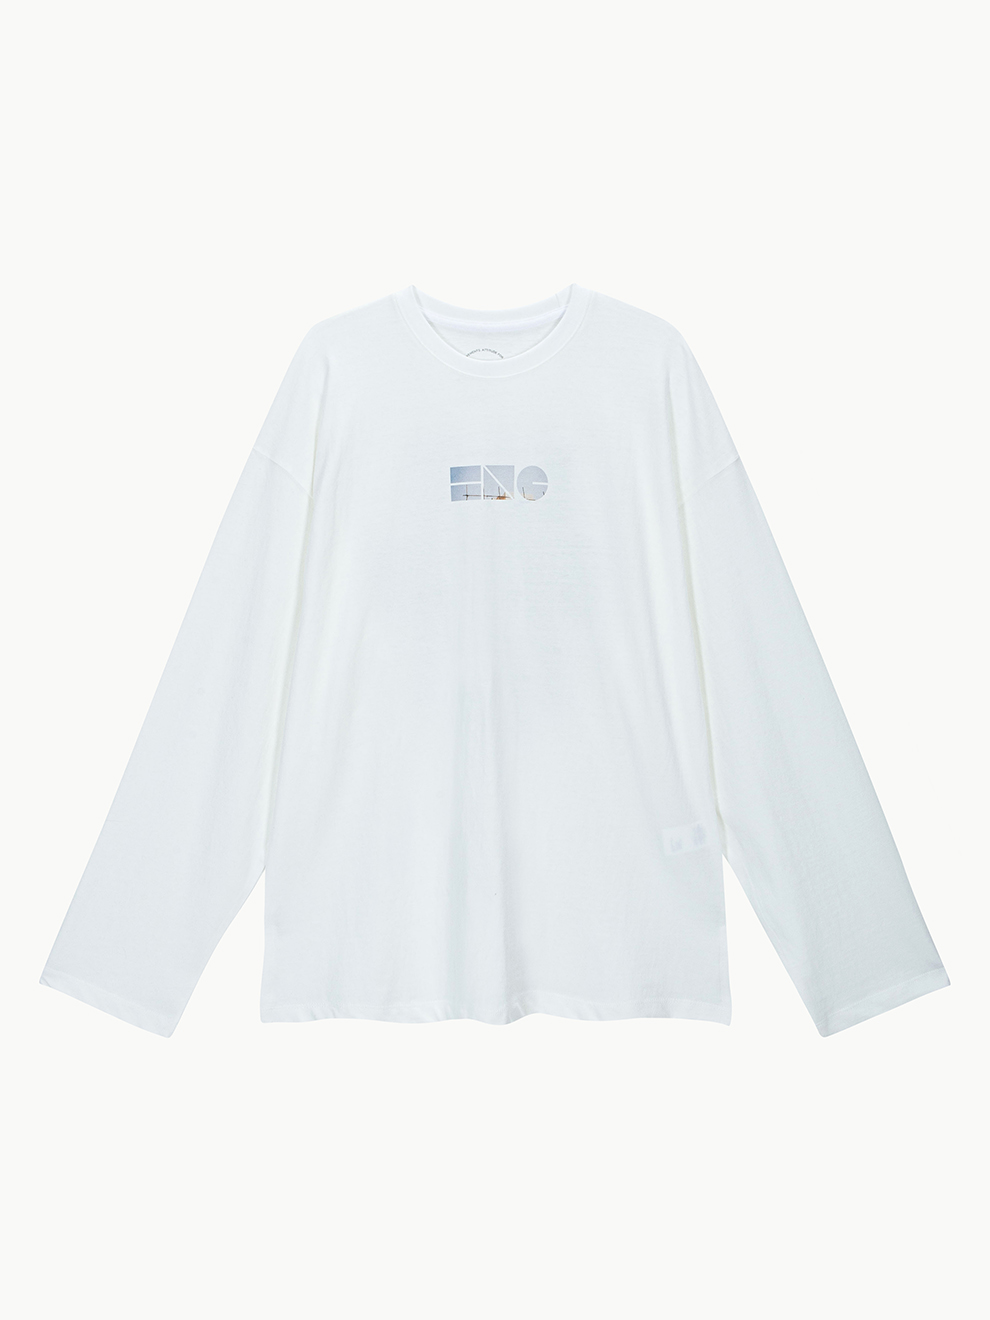 HNG Photo T-Shirt - Off White